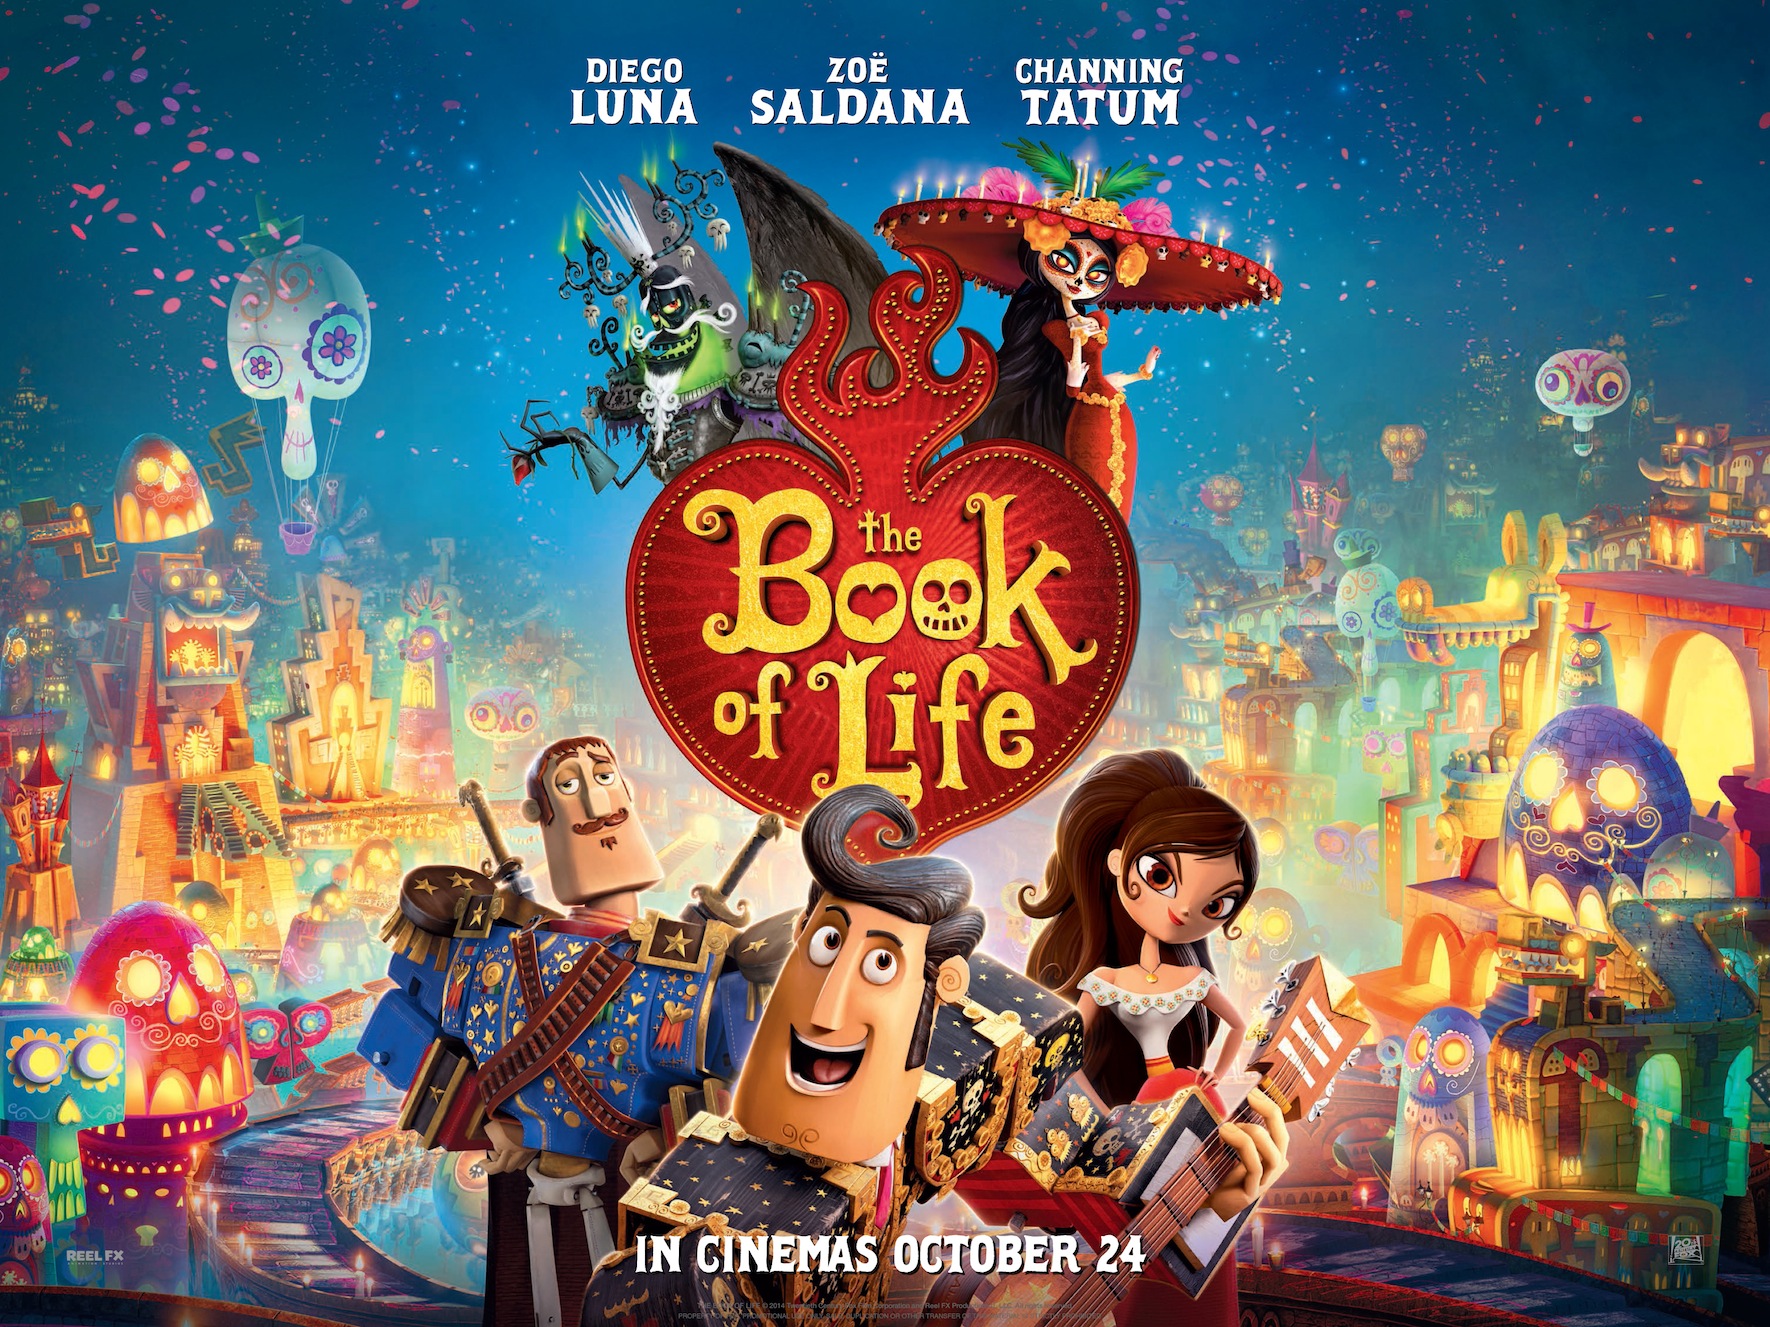 THE BOOK OF LIFE TEASER QUAD